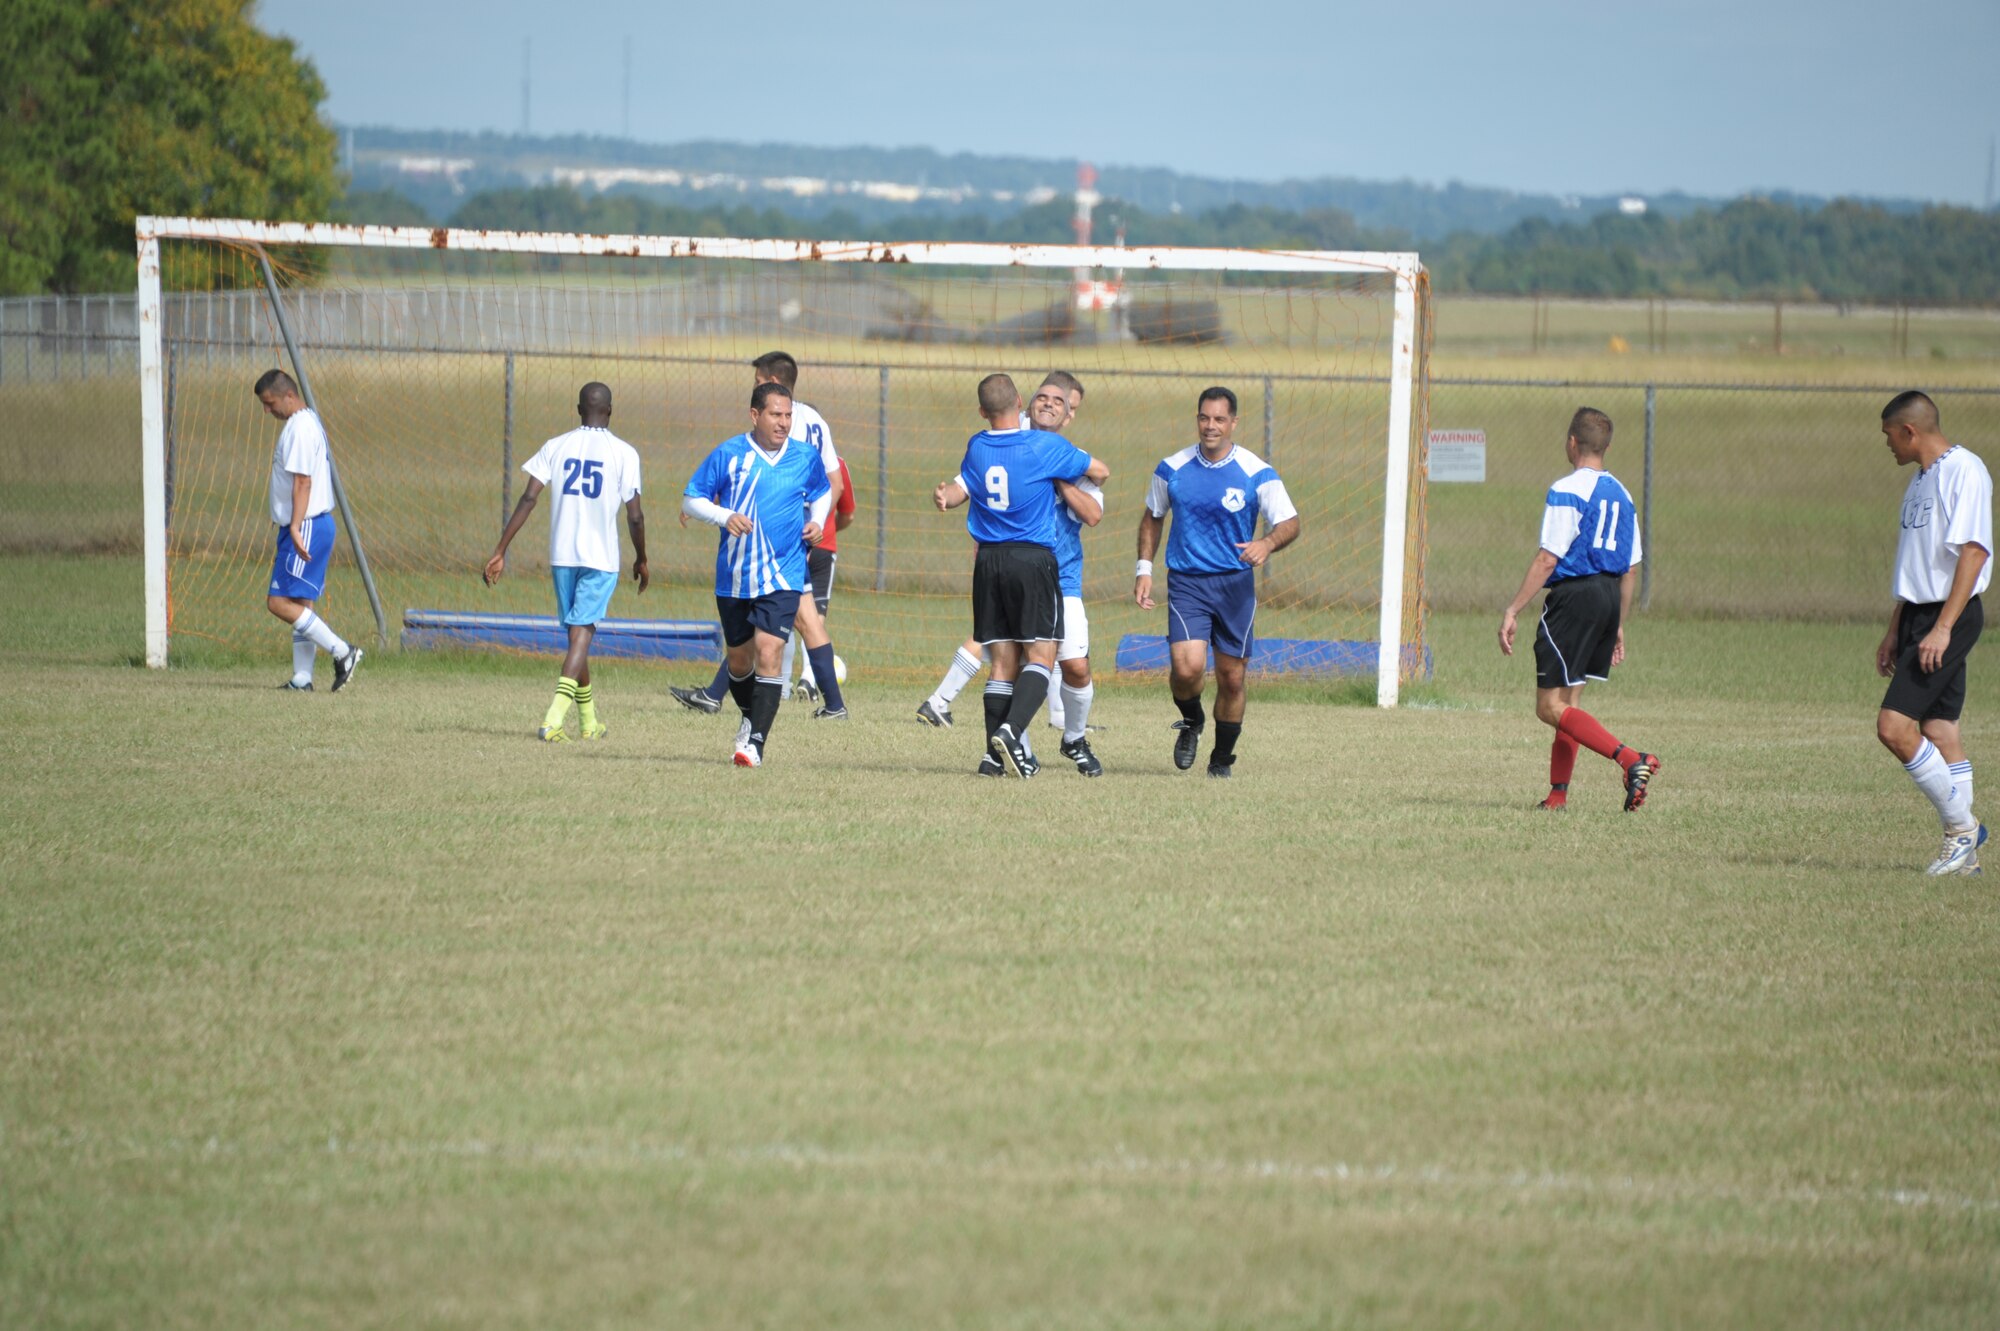 Students from Air War College celebrate a goal during their soccer game against Air Command and Staff College on Maxwell Air Force Base, Oct. 8. The game was part of a 2-day competition between the academic powerhouses compiling of approximately 20 events, both scholastic and athletic. (U.S. Air Force photo by Airman 1st Class William Blankenship)